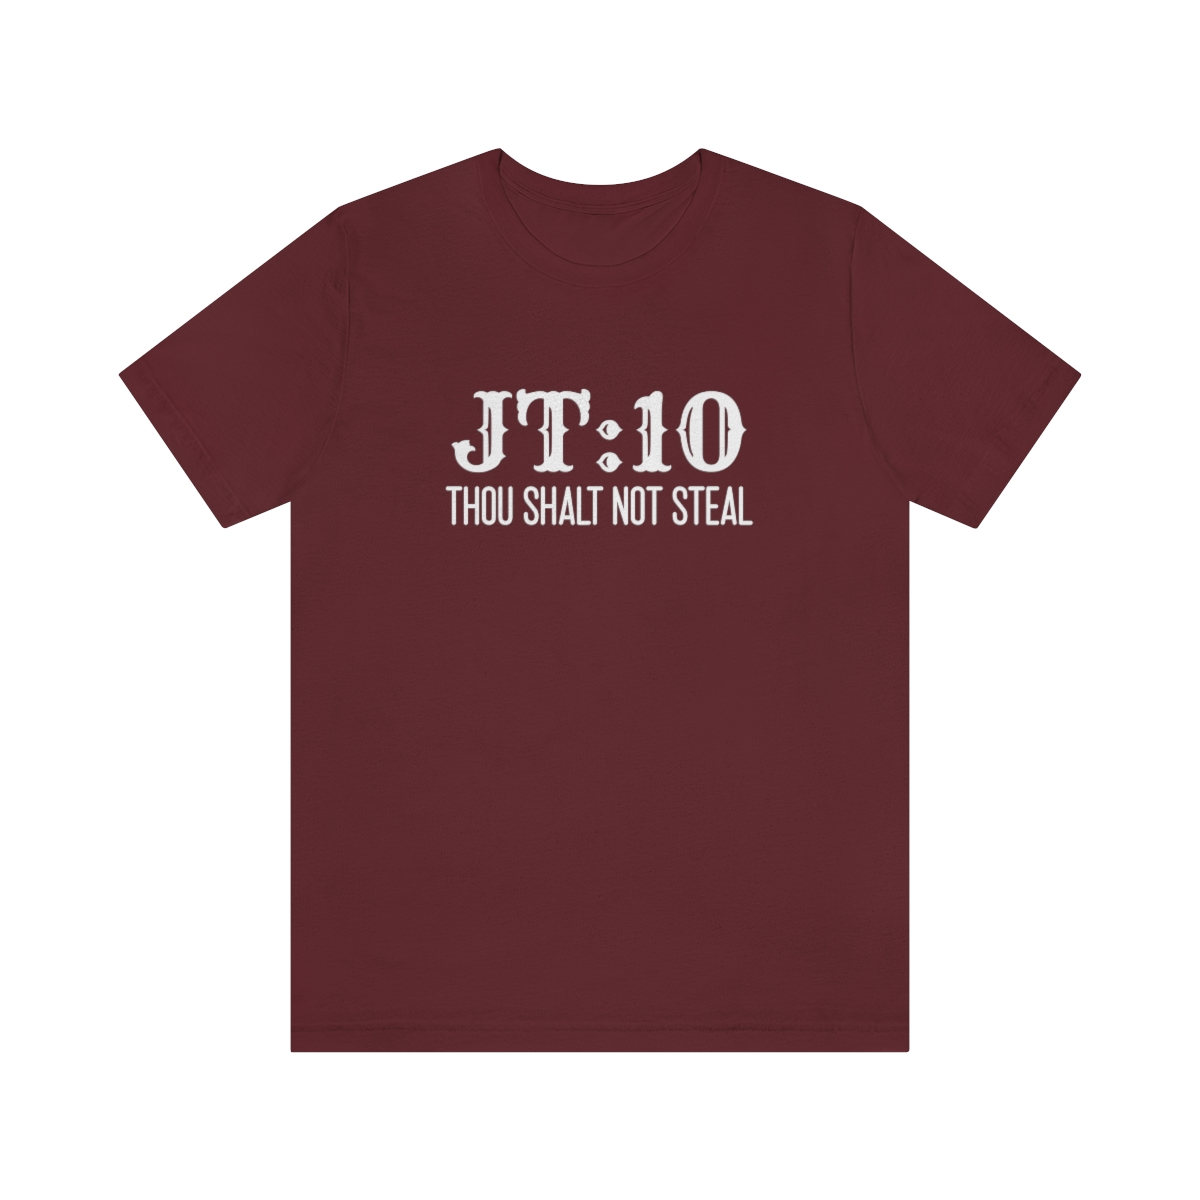 JT Realmuto Phillies Shirts Thou Shalt Not Steal - Section 419